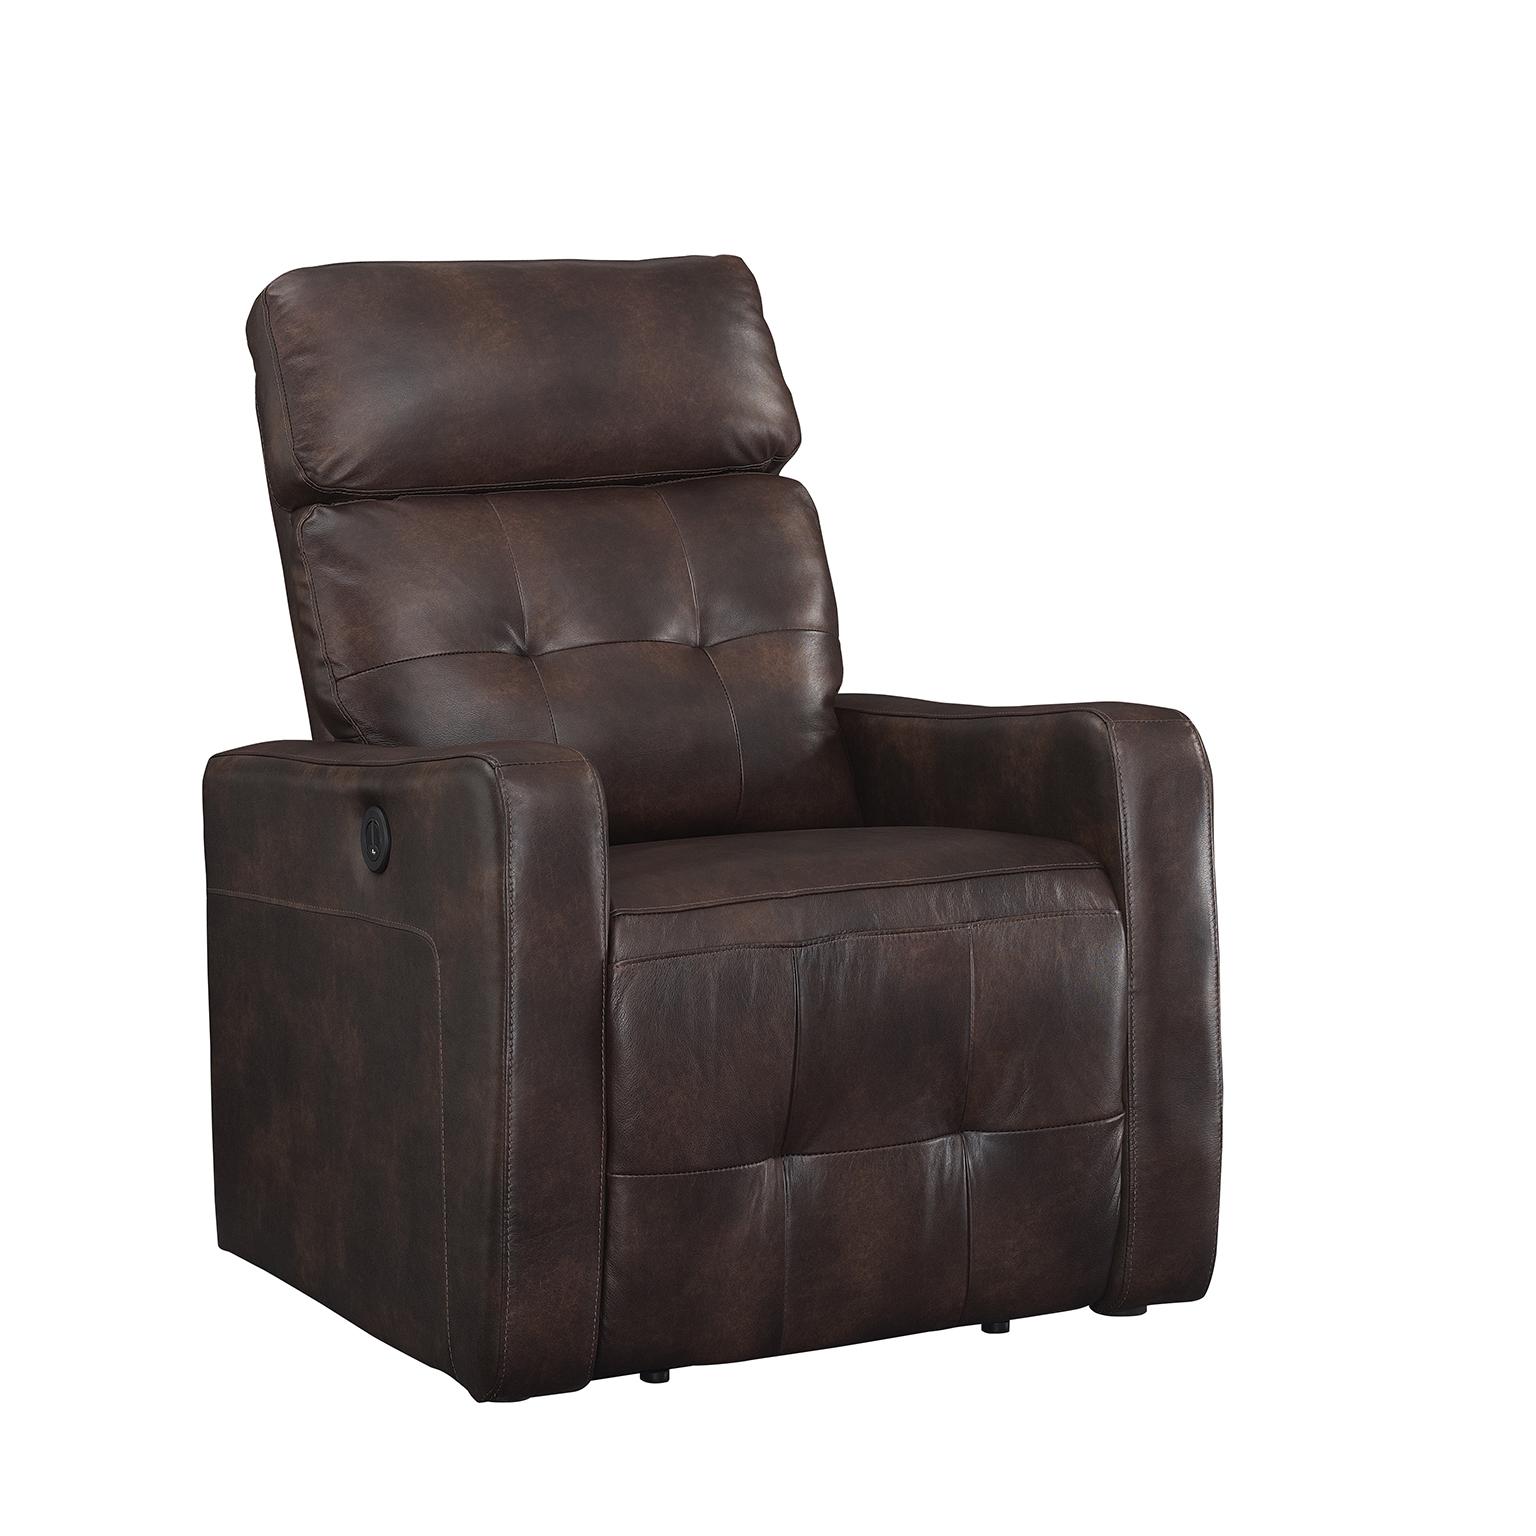 Contemporary Reclining Chair Elsa ELSA-Brown-PRC-1 in Brown Leather Match